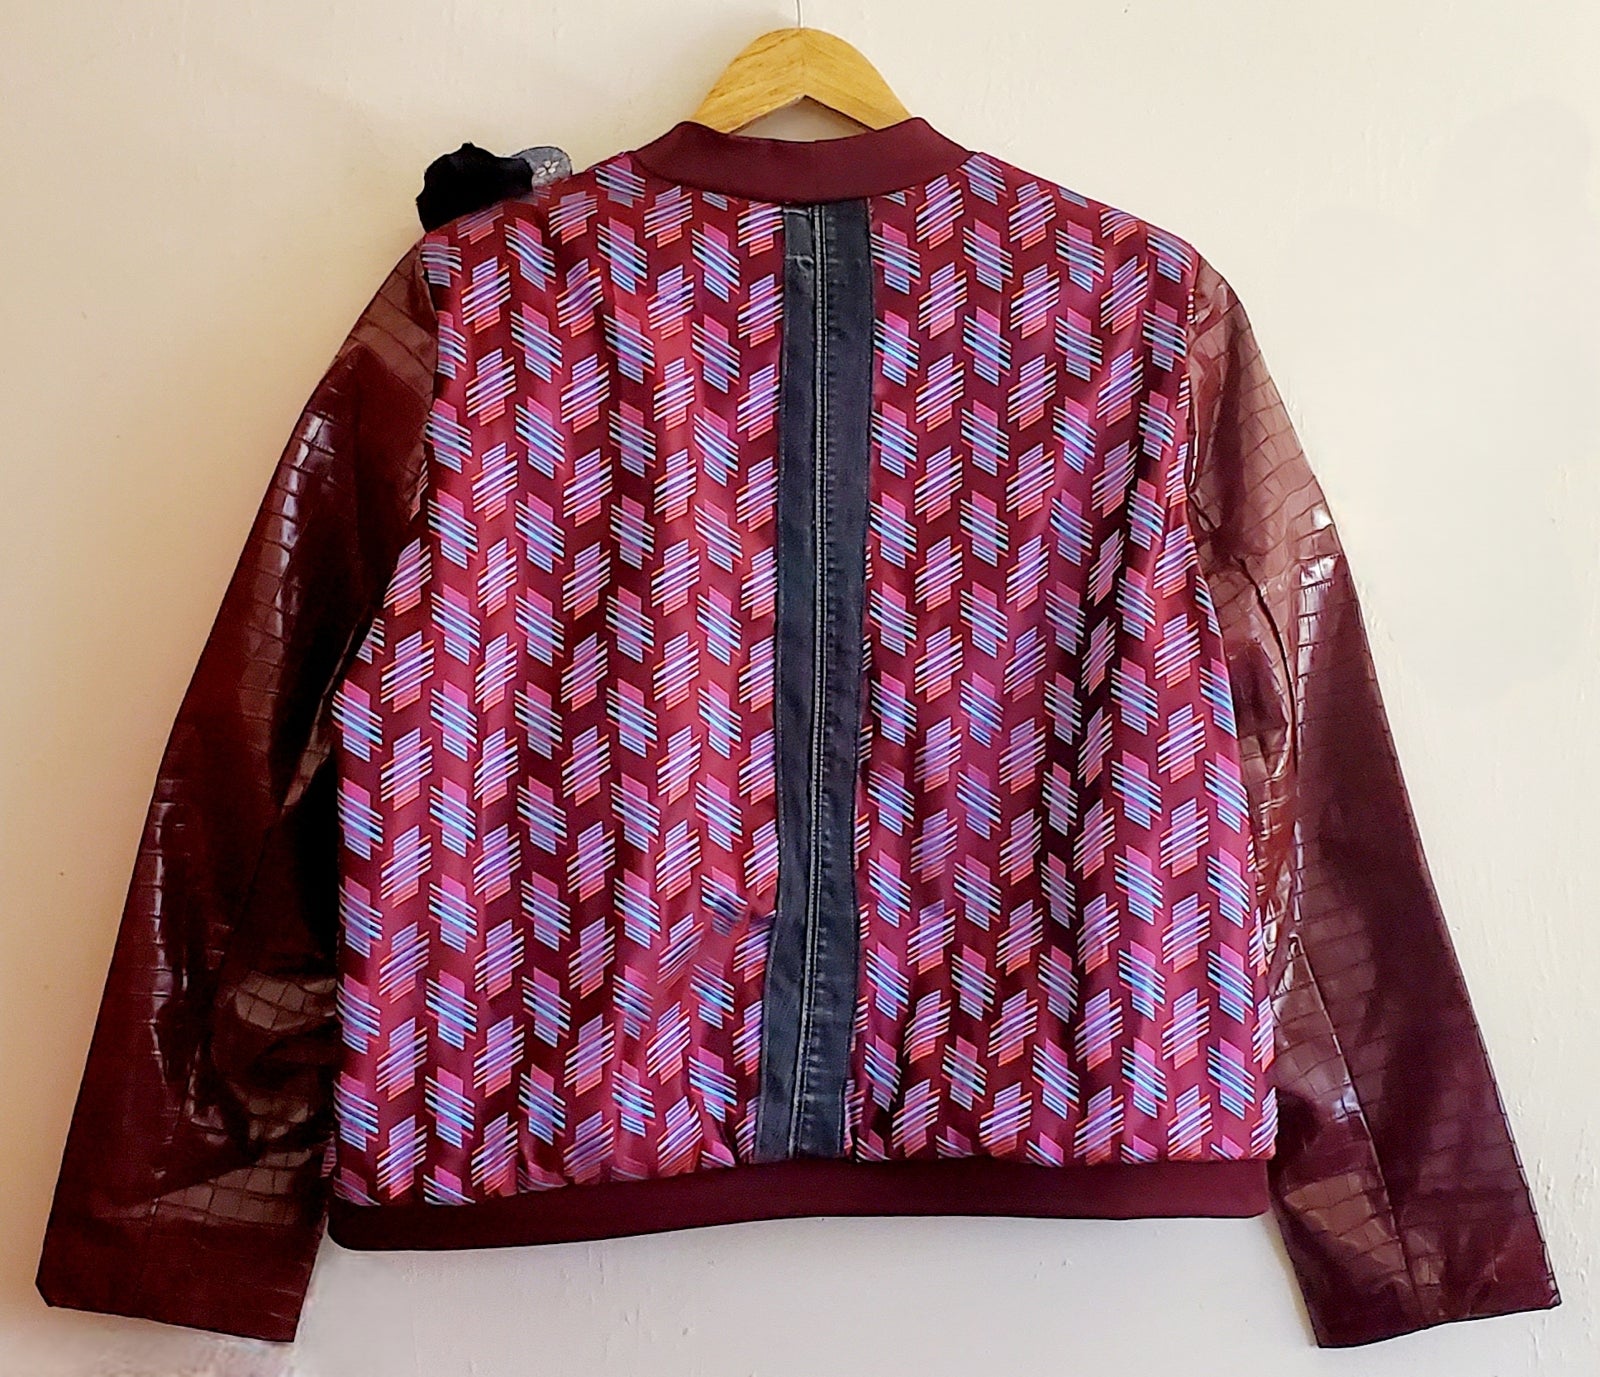 Back view of striped print bomber jacket with crocodile print embossed sleeves and denim strip at center back